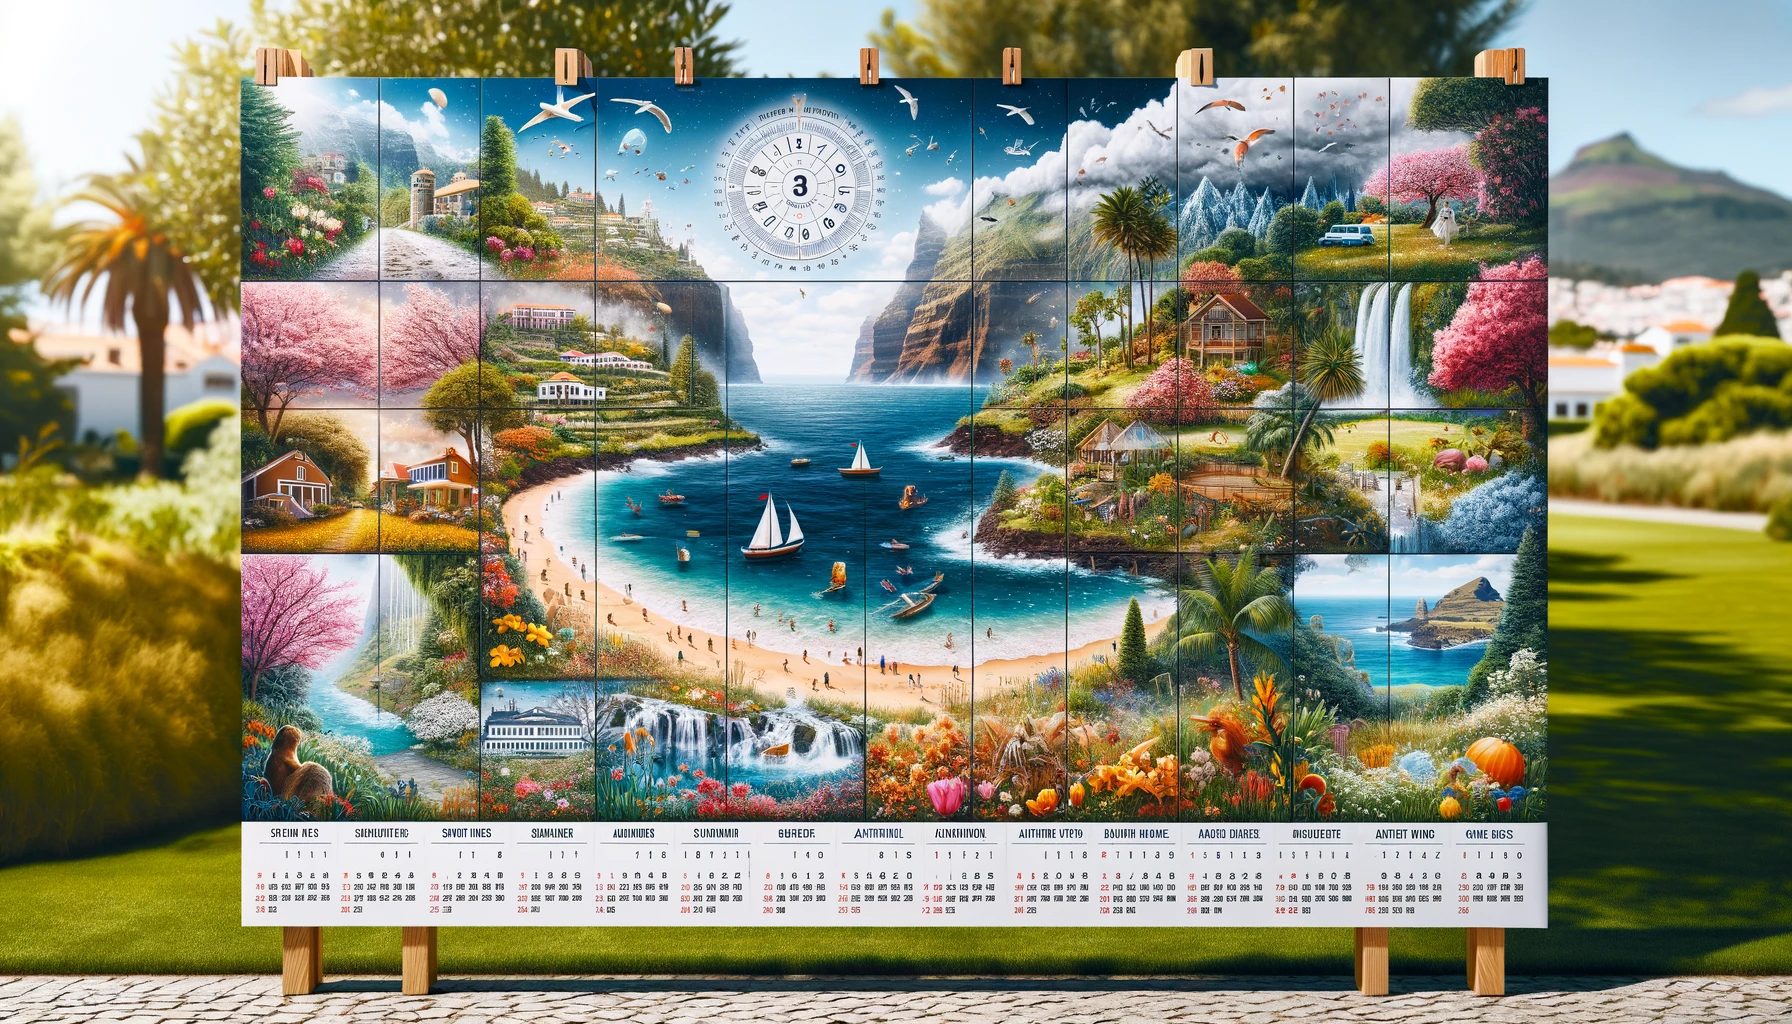 Colorful scenic annual calendar displayed outdoors.